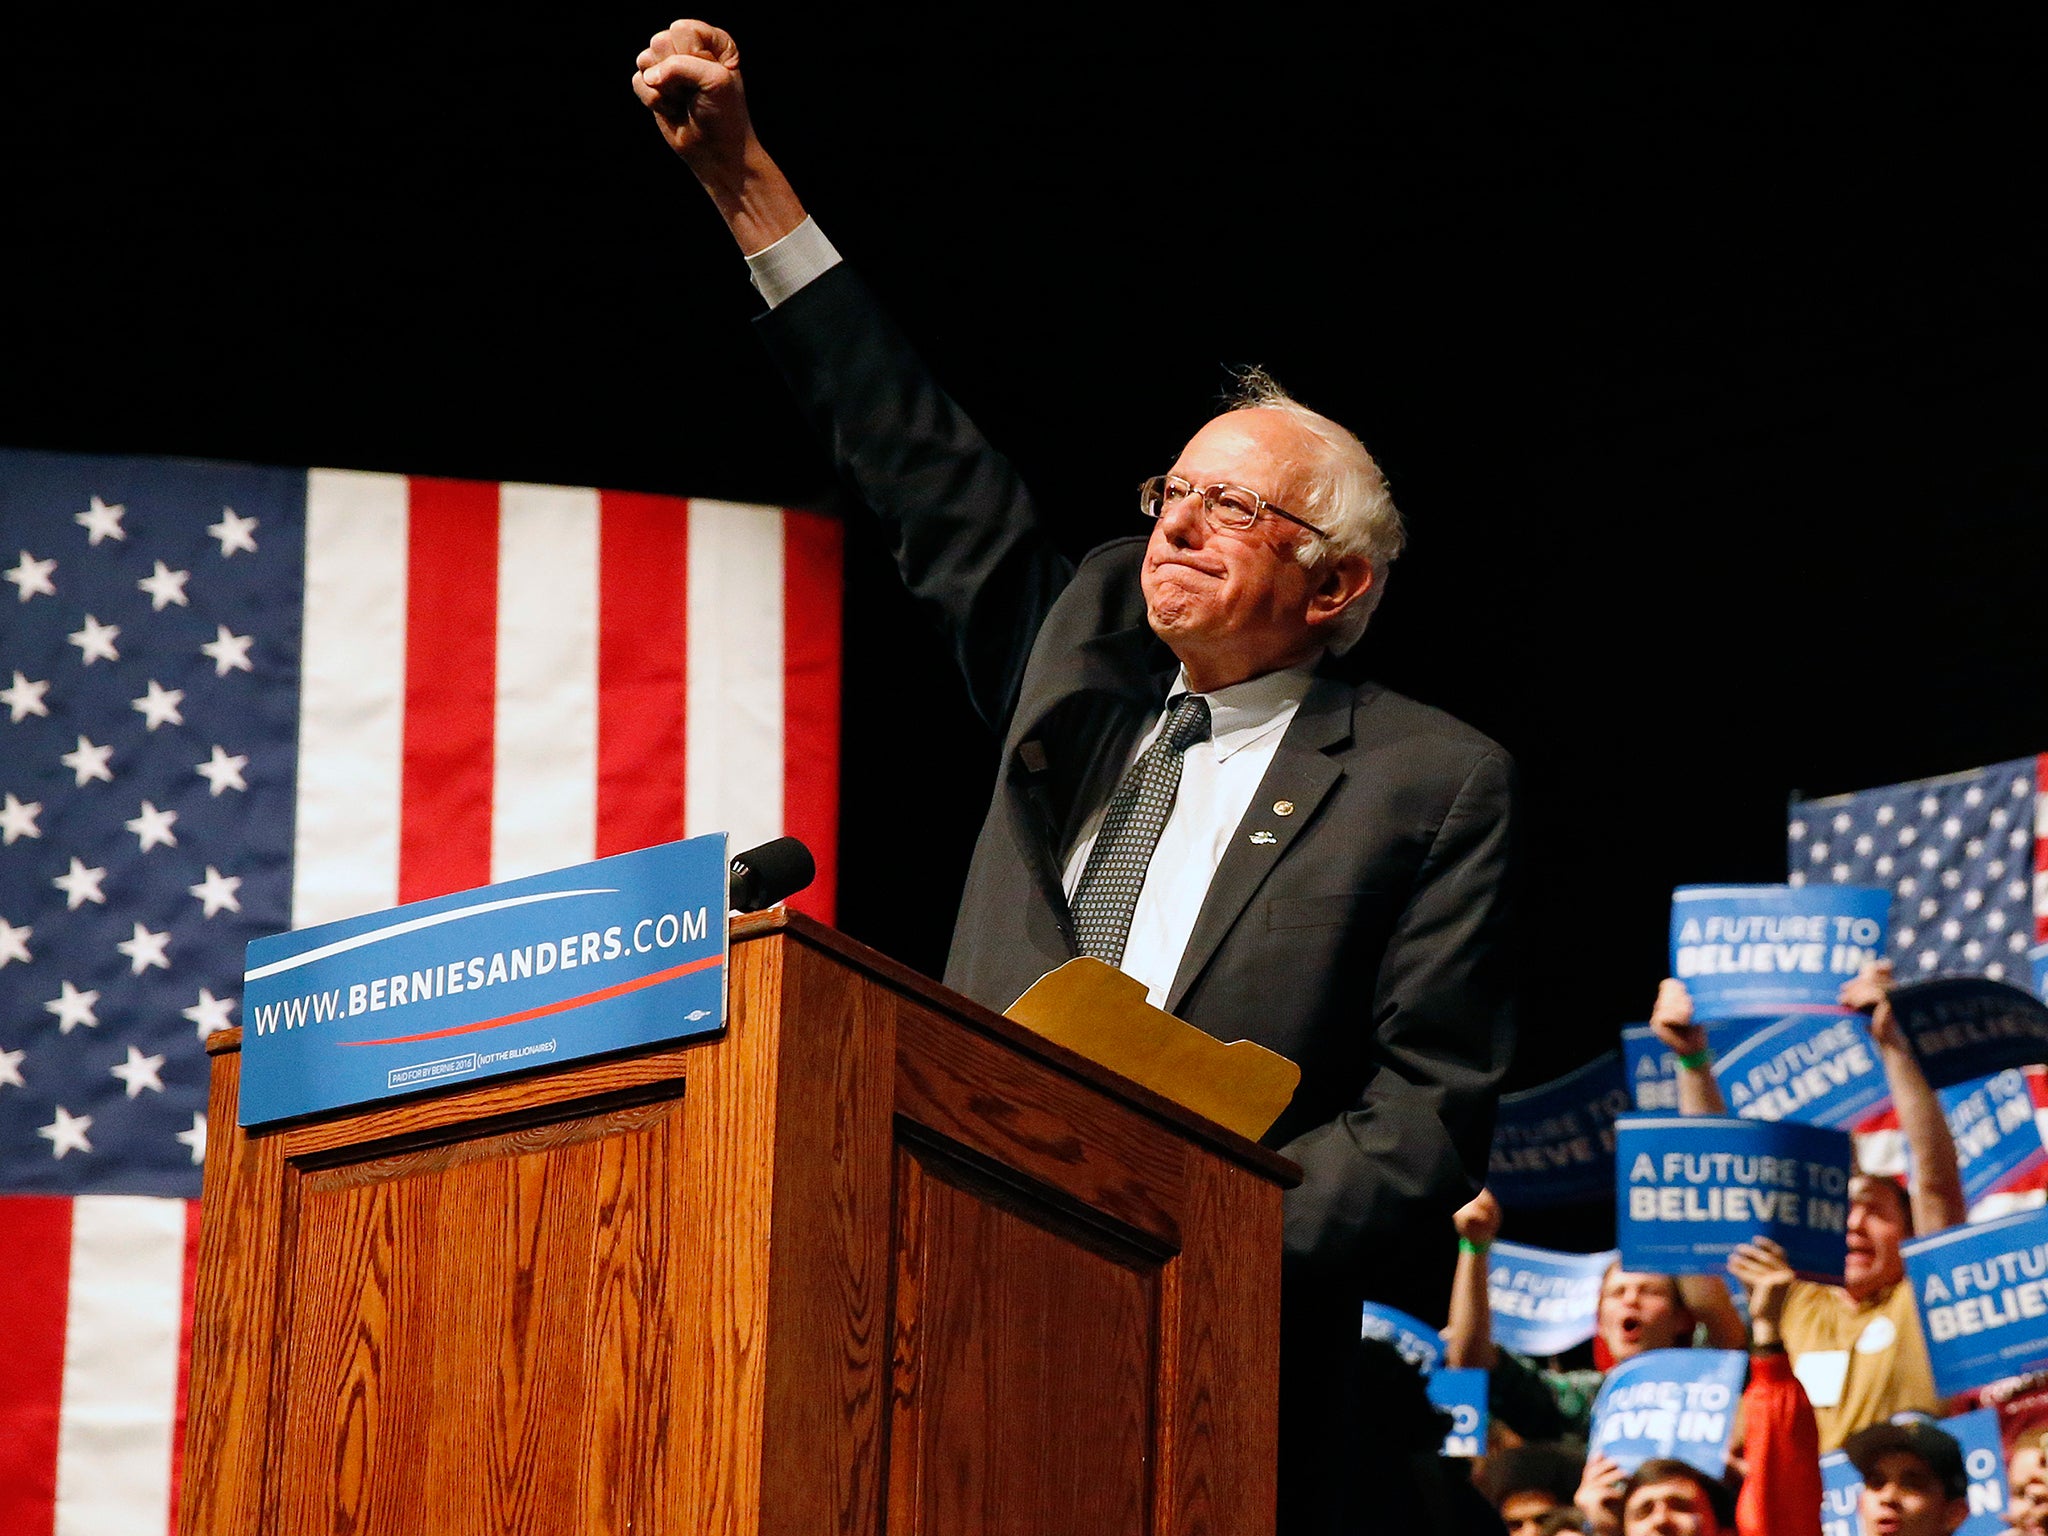 Mr Sanders' grassroots campaign is funded by 3 million small donors